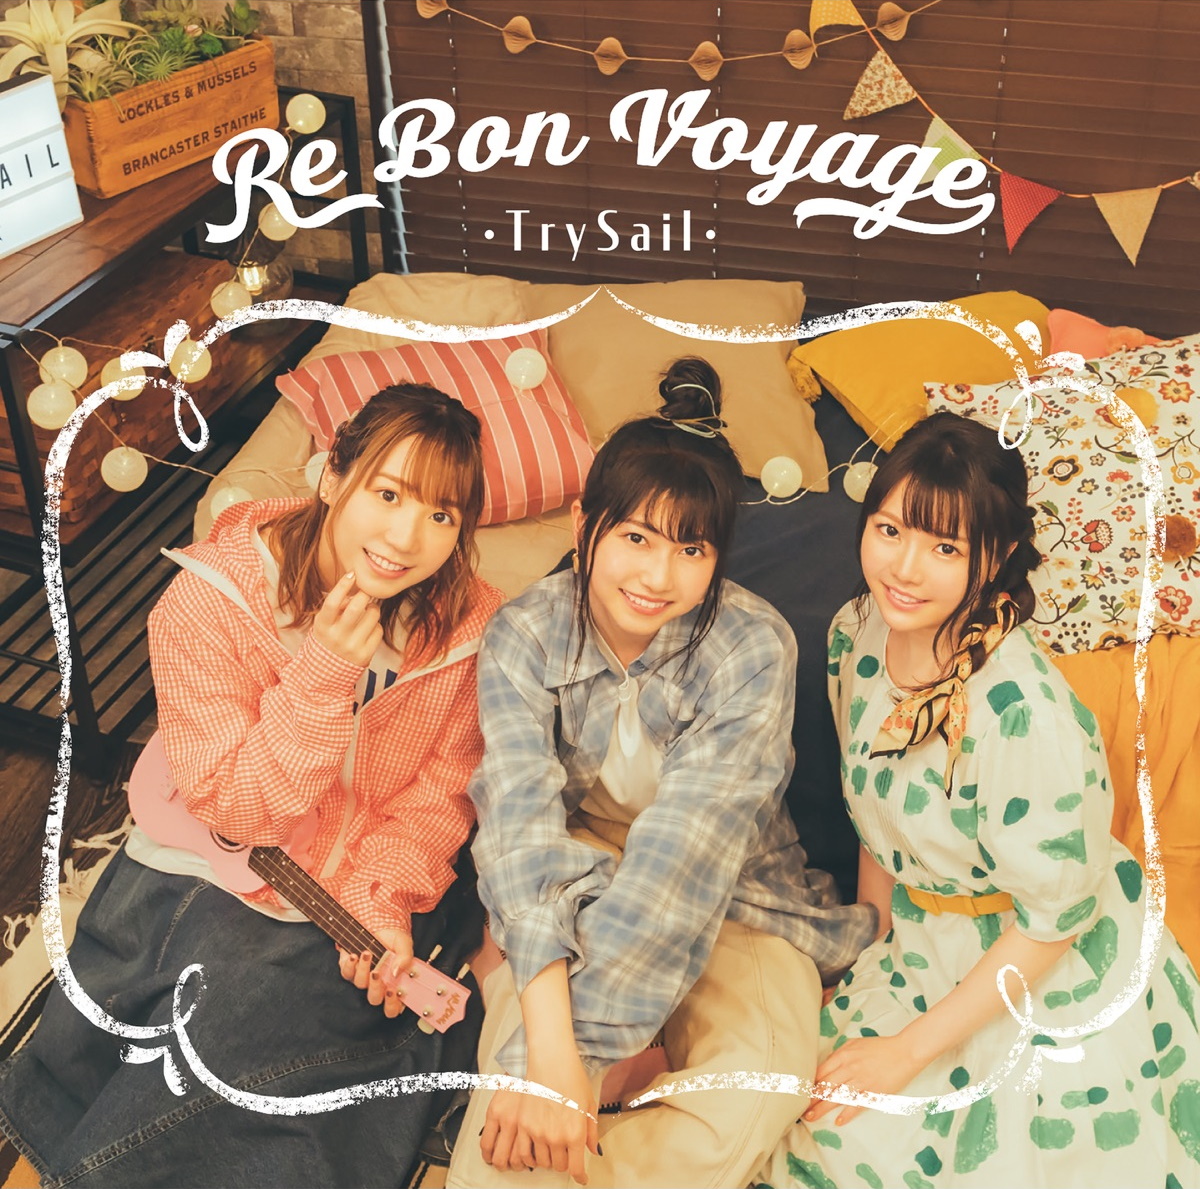 Cover for『TrySail - Favorite Days』from the release『Re Bon Voyage』